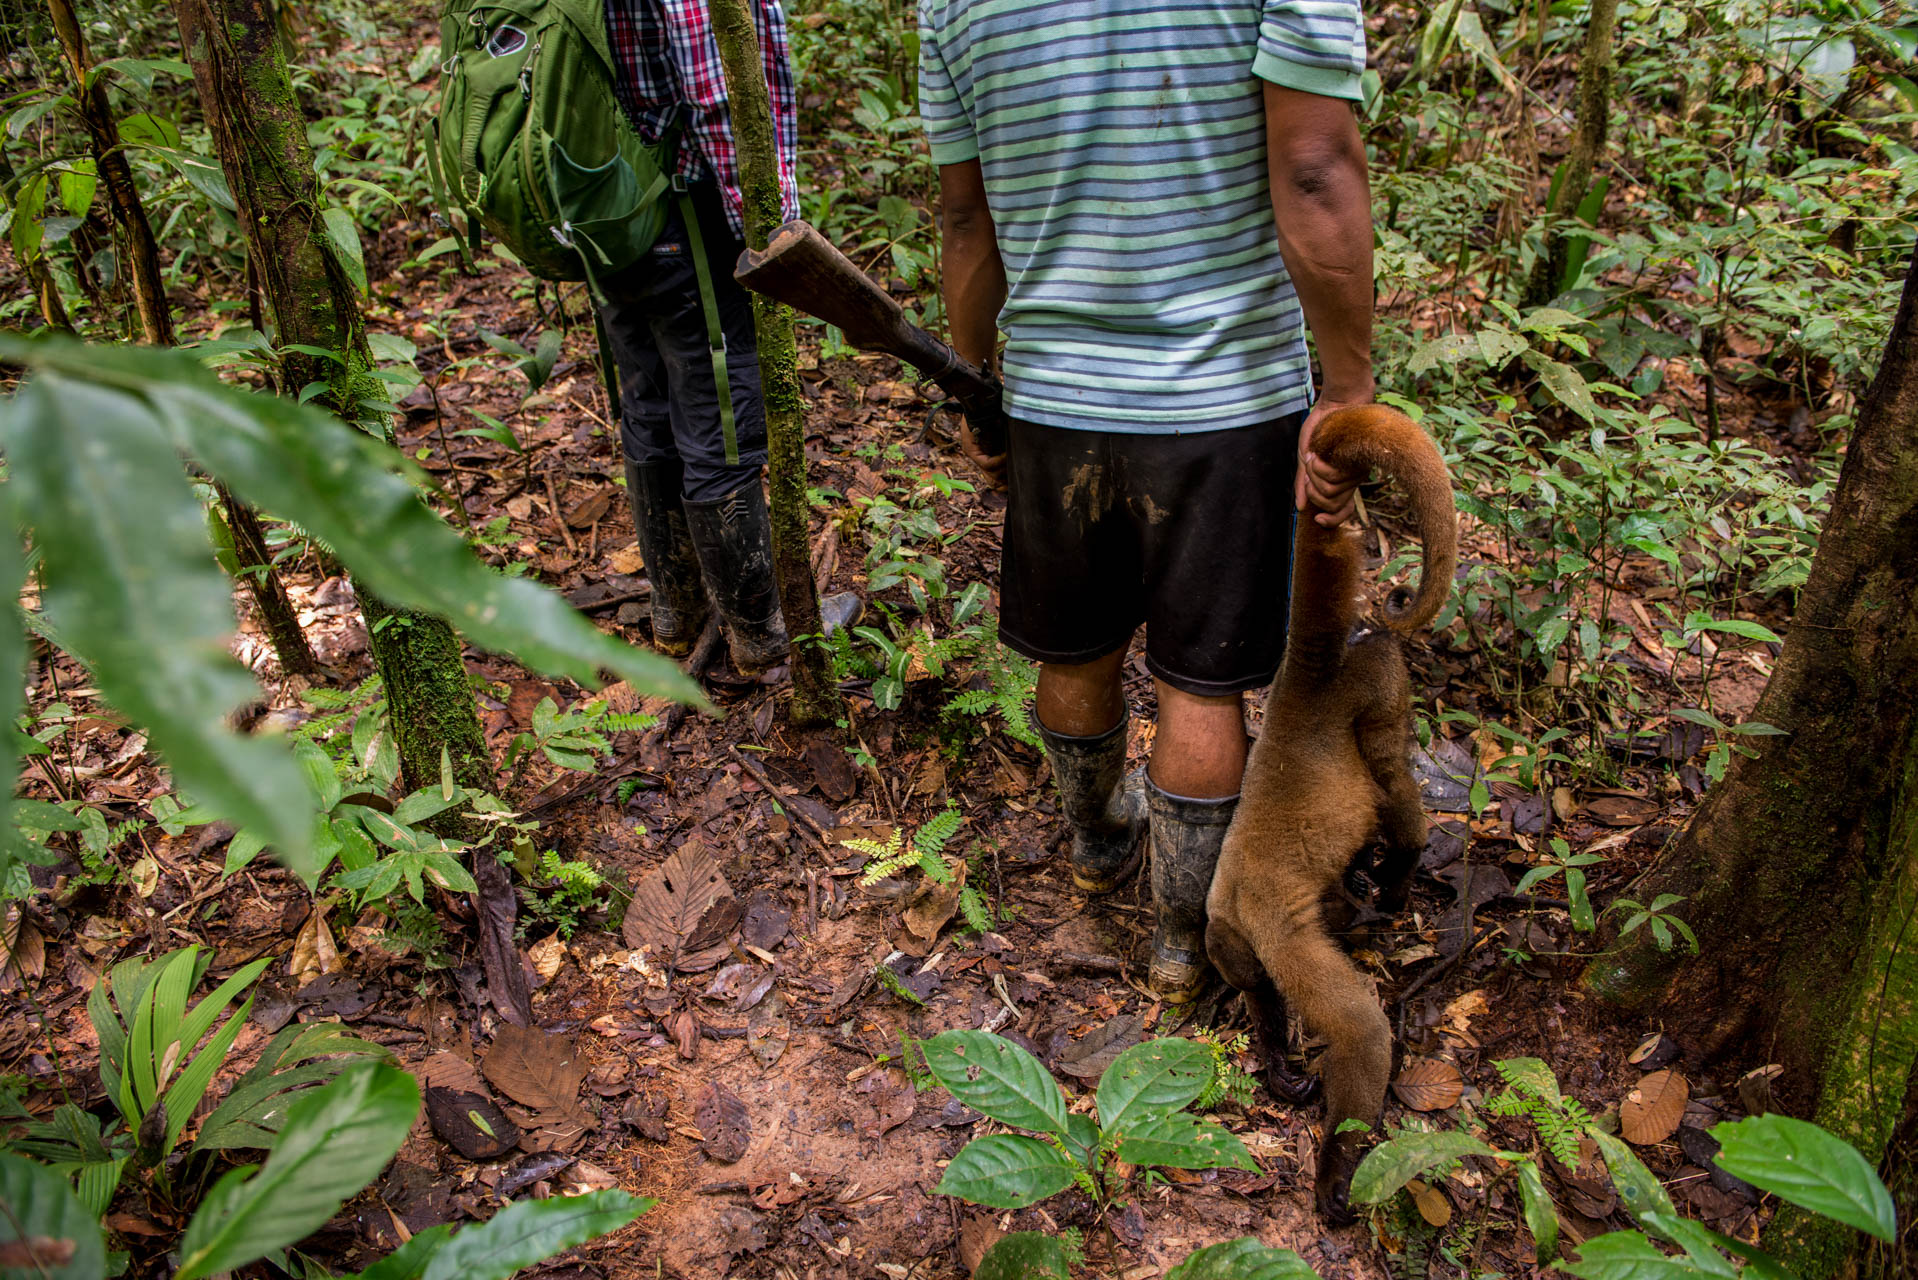 Wolly Monkey ready to be carried out of the forest after a hunt. Ecuador.